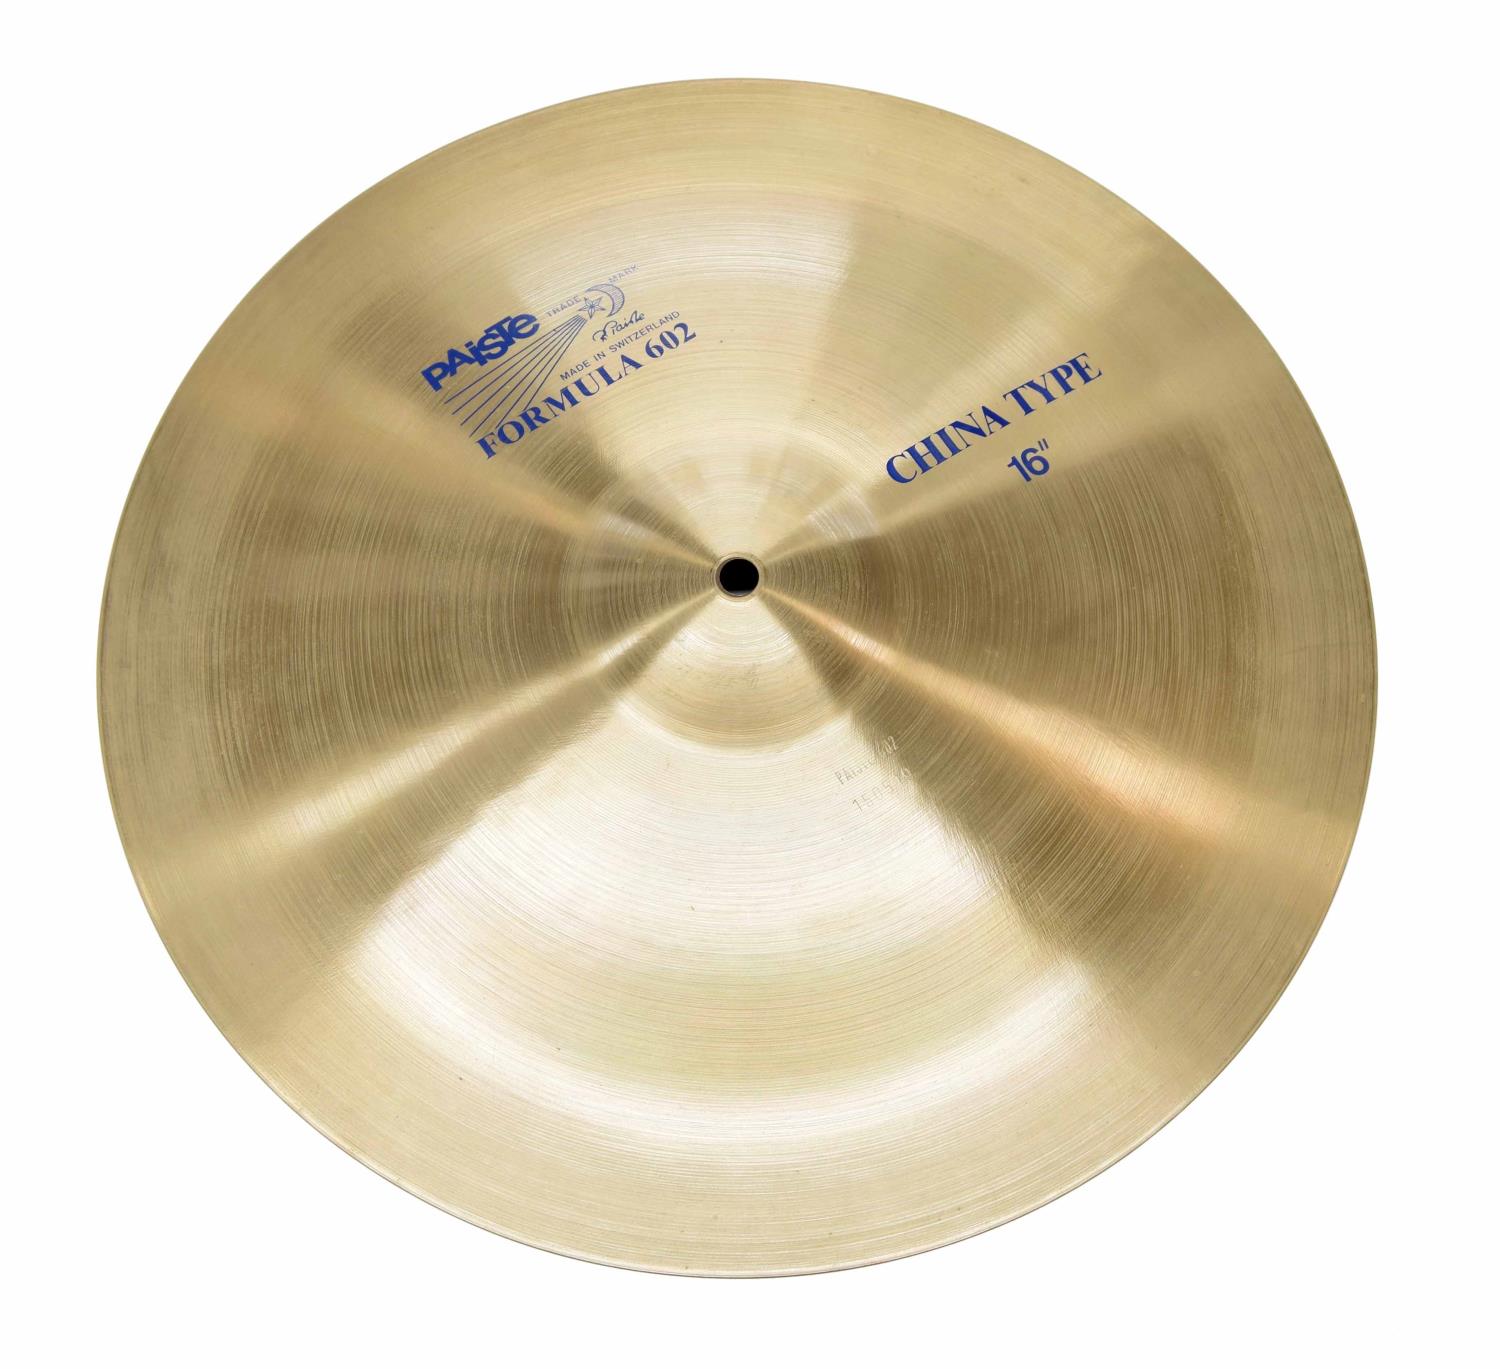 Paul Chalklin - Paiste Formula 602 16" China Type cymbal *Hand selected by Paul Chalklin at the